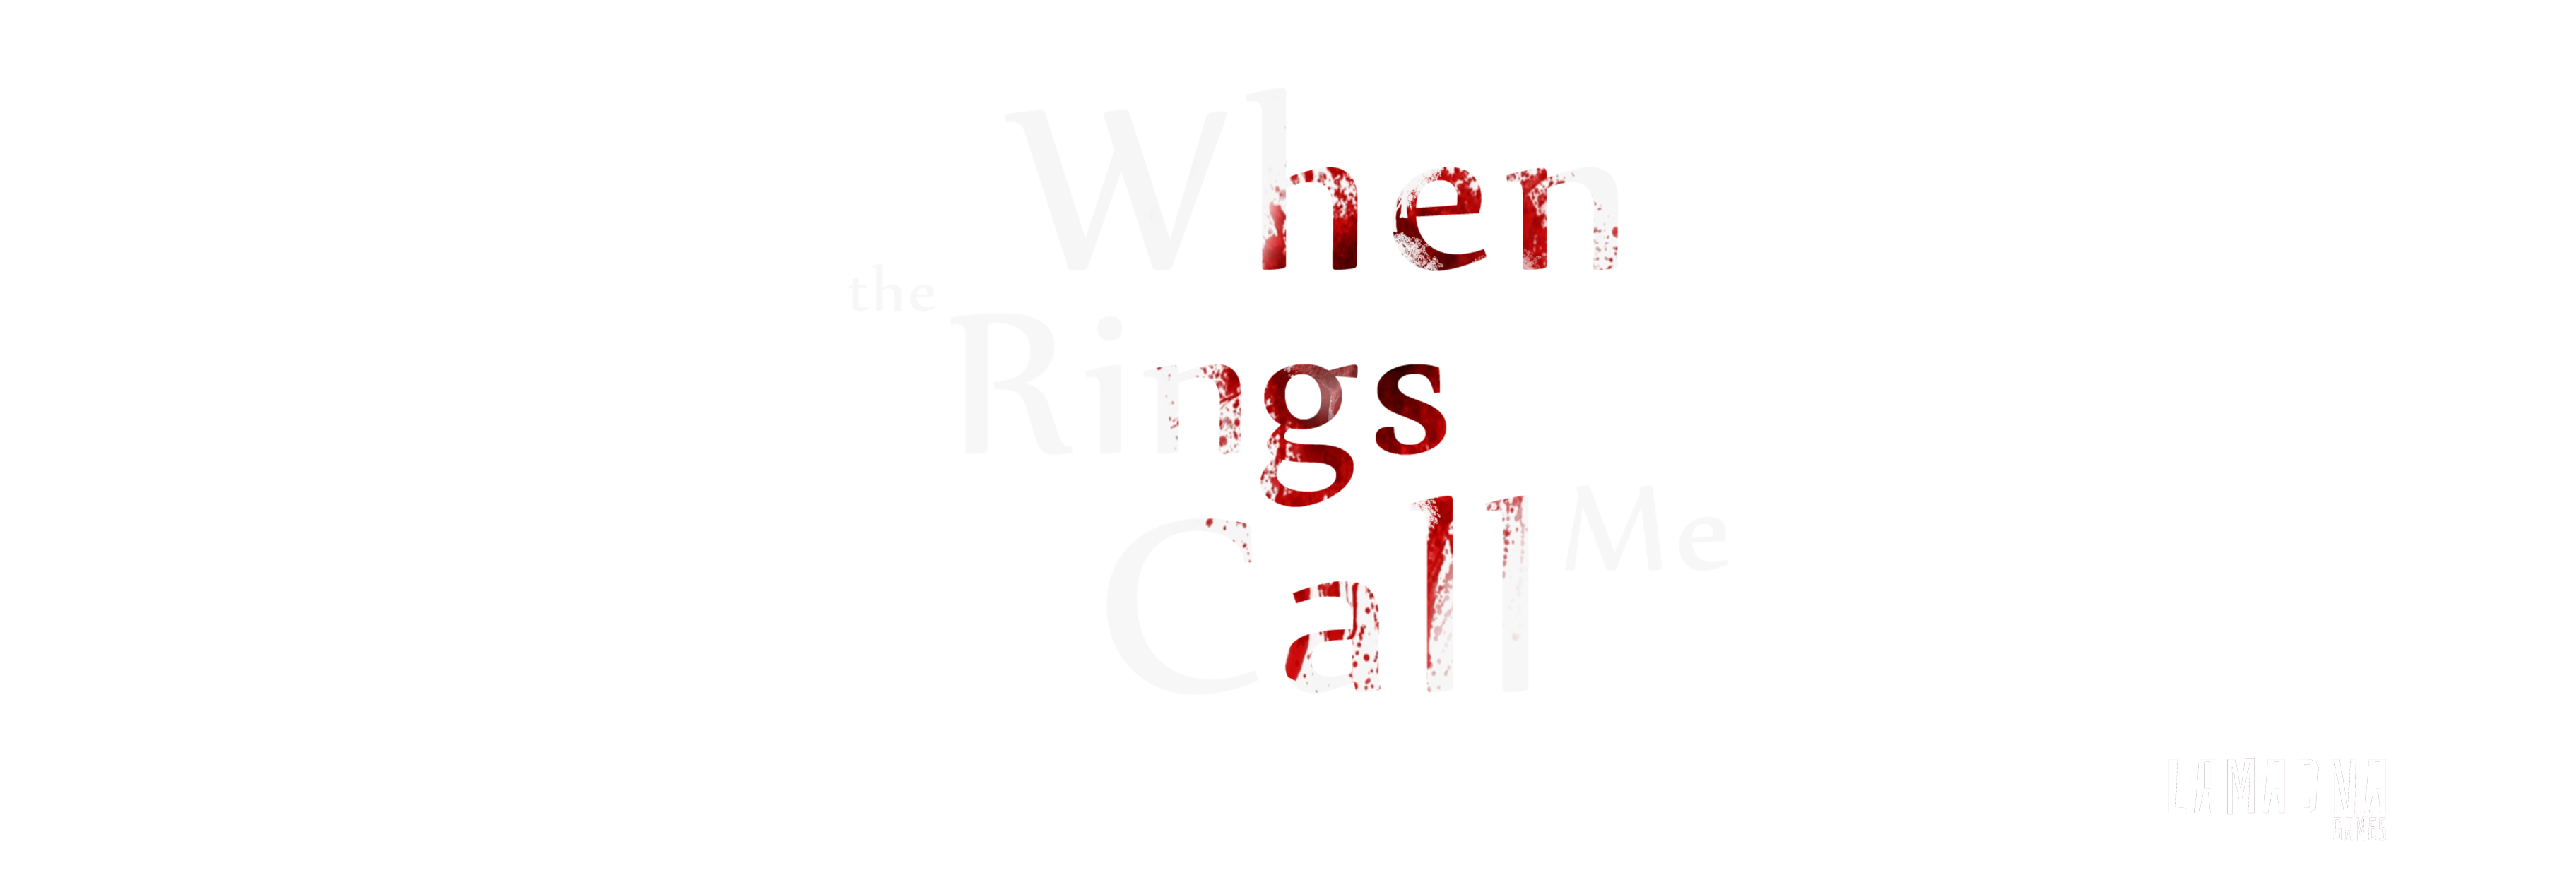 When The Rings Call Me